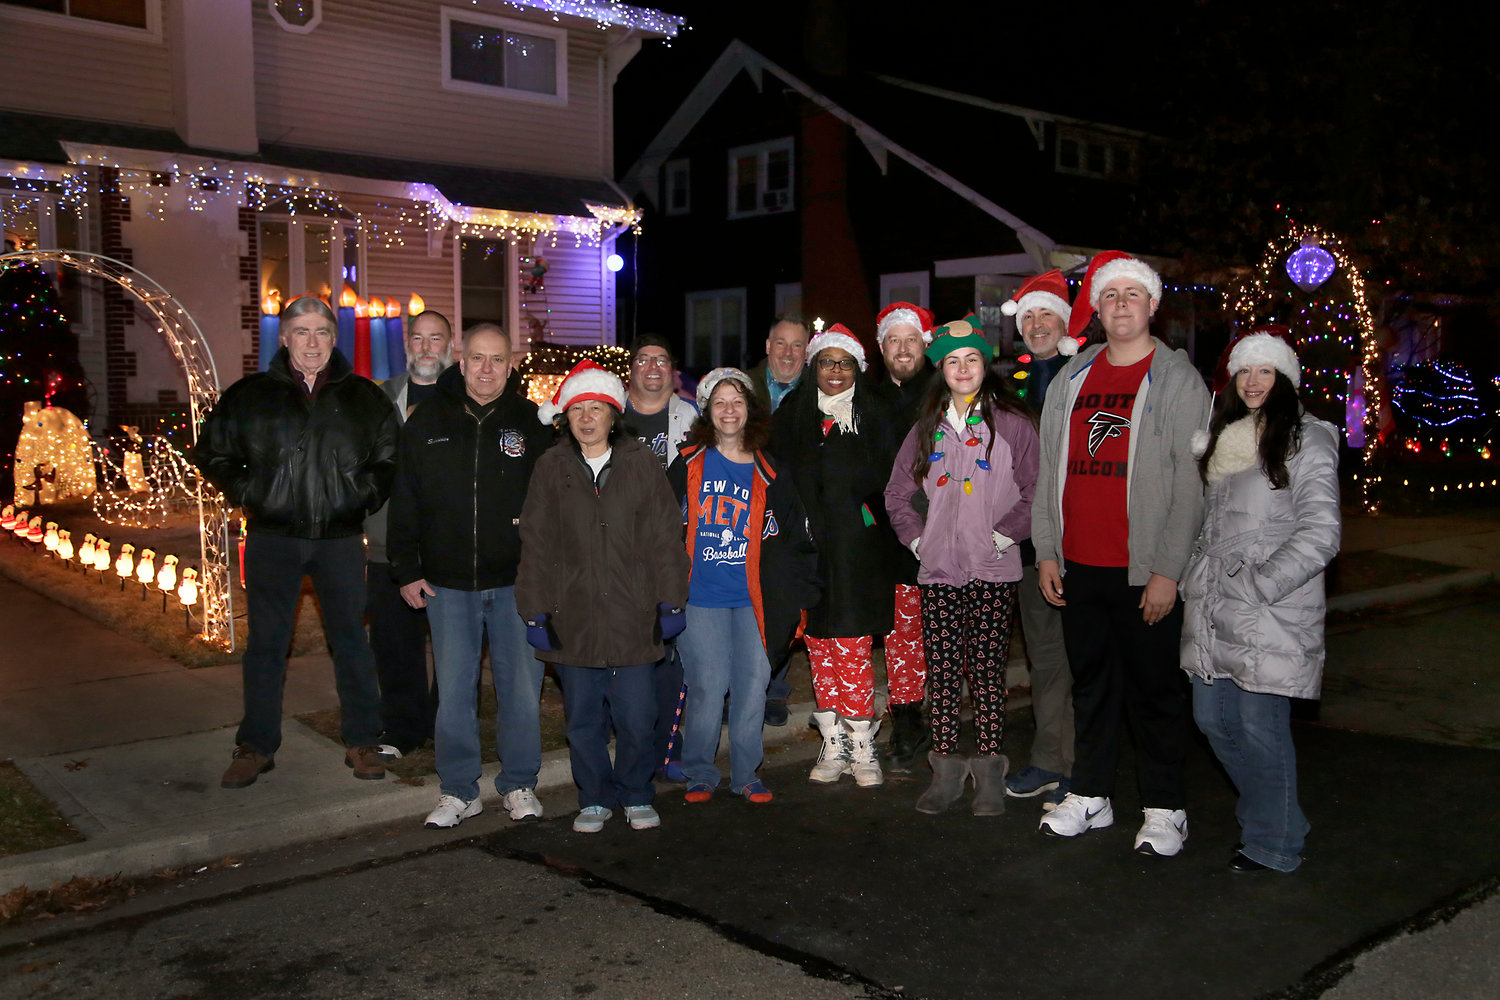 Sylvan Place neighbors John McGovern, from left, Stephen Carr, Wally Schroeder, Carole Schroeder, Alex Carr, Sheryl Carr, Dino Fino, Sherise Dowling, Thomas Dowling, Jessica Dyer, Rich Dyer, Christian Dyer and Erin Ann McGovern at their 2019 Christmas block party fundraiser.